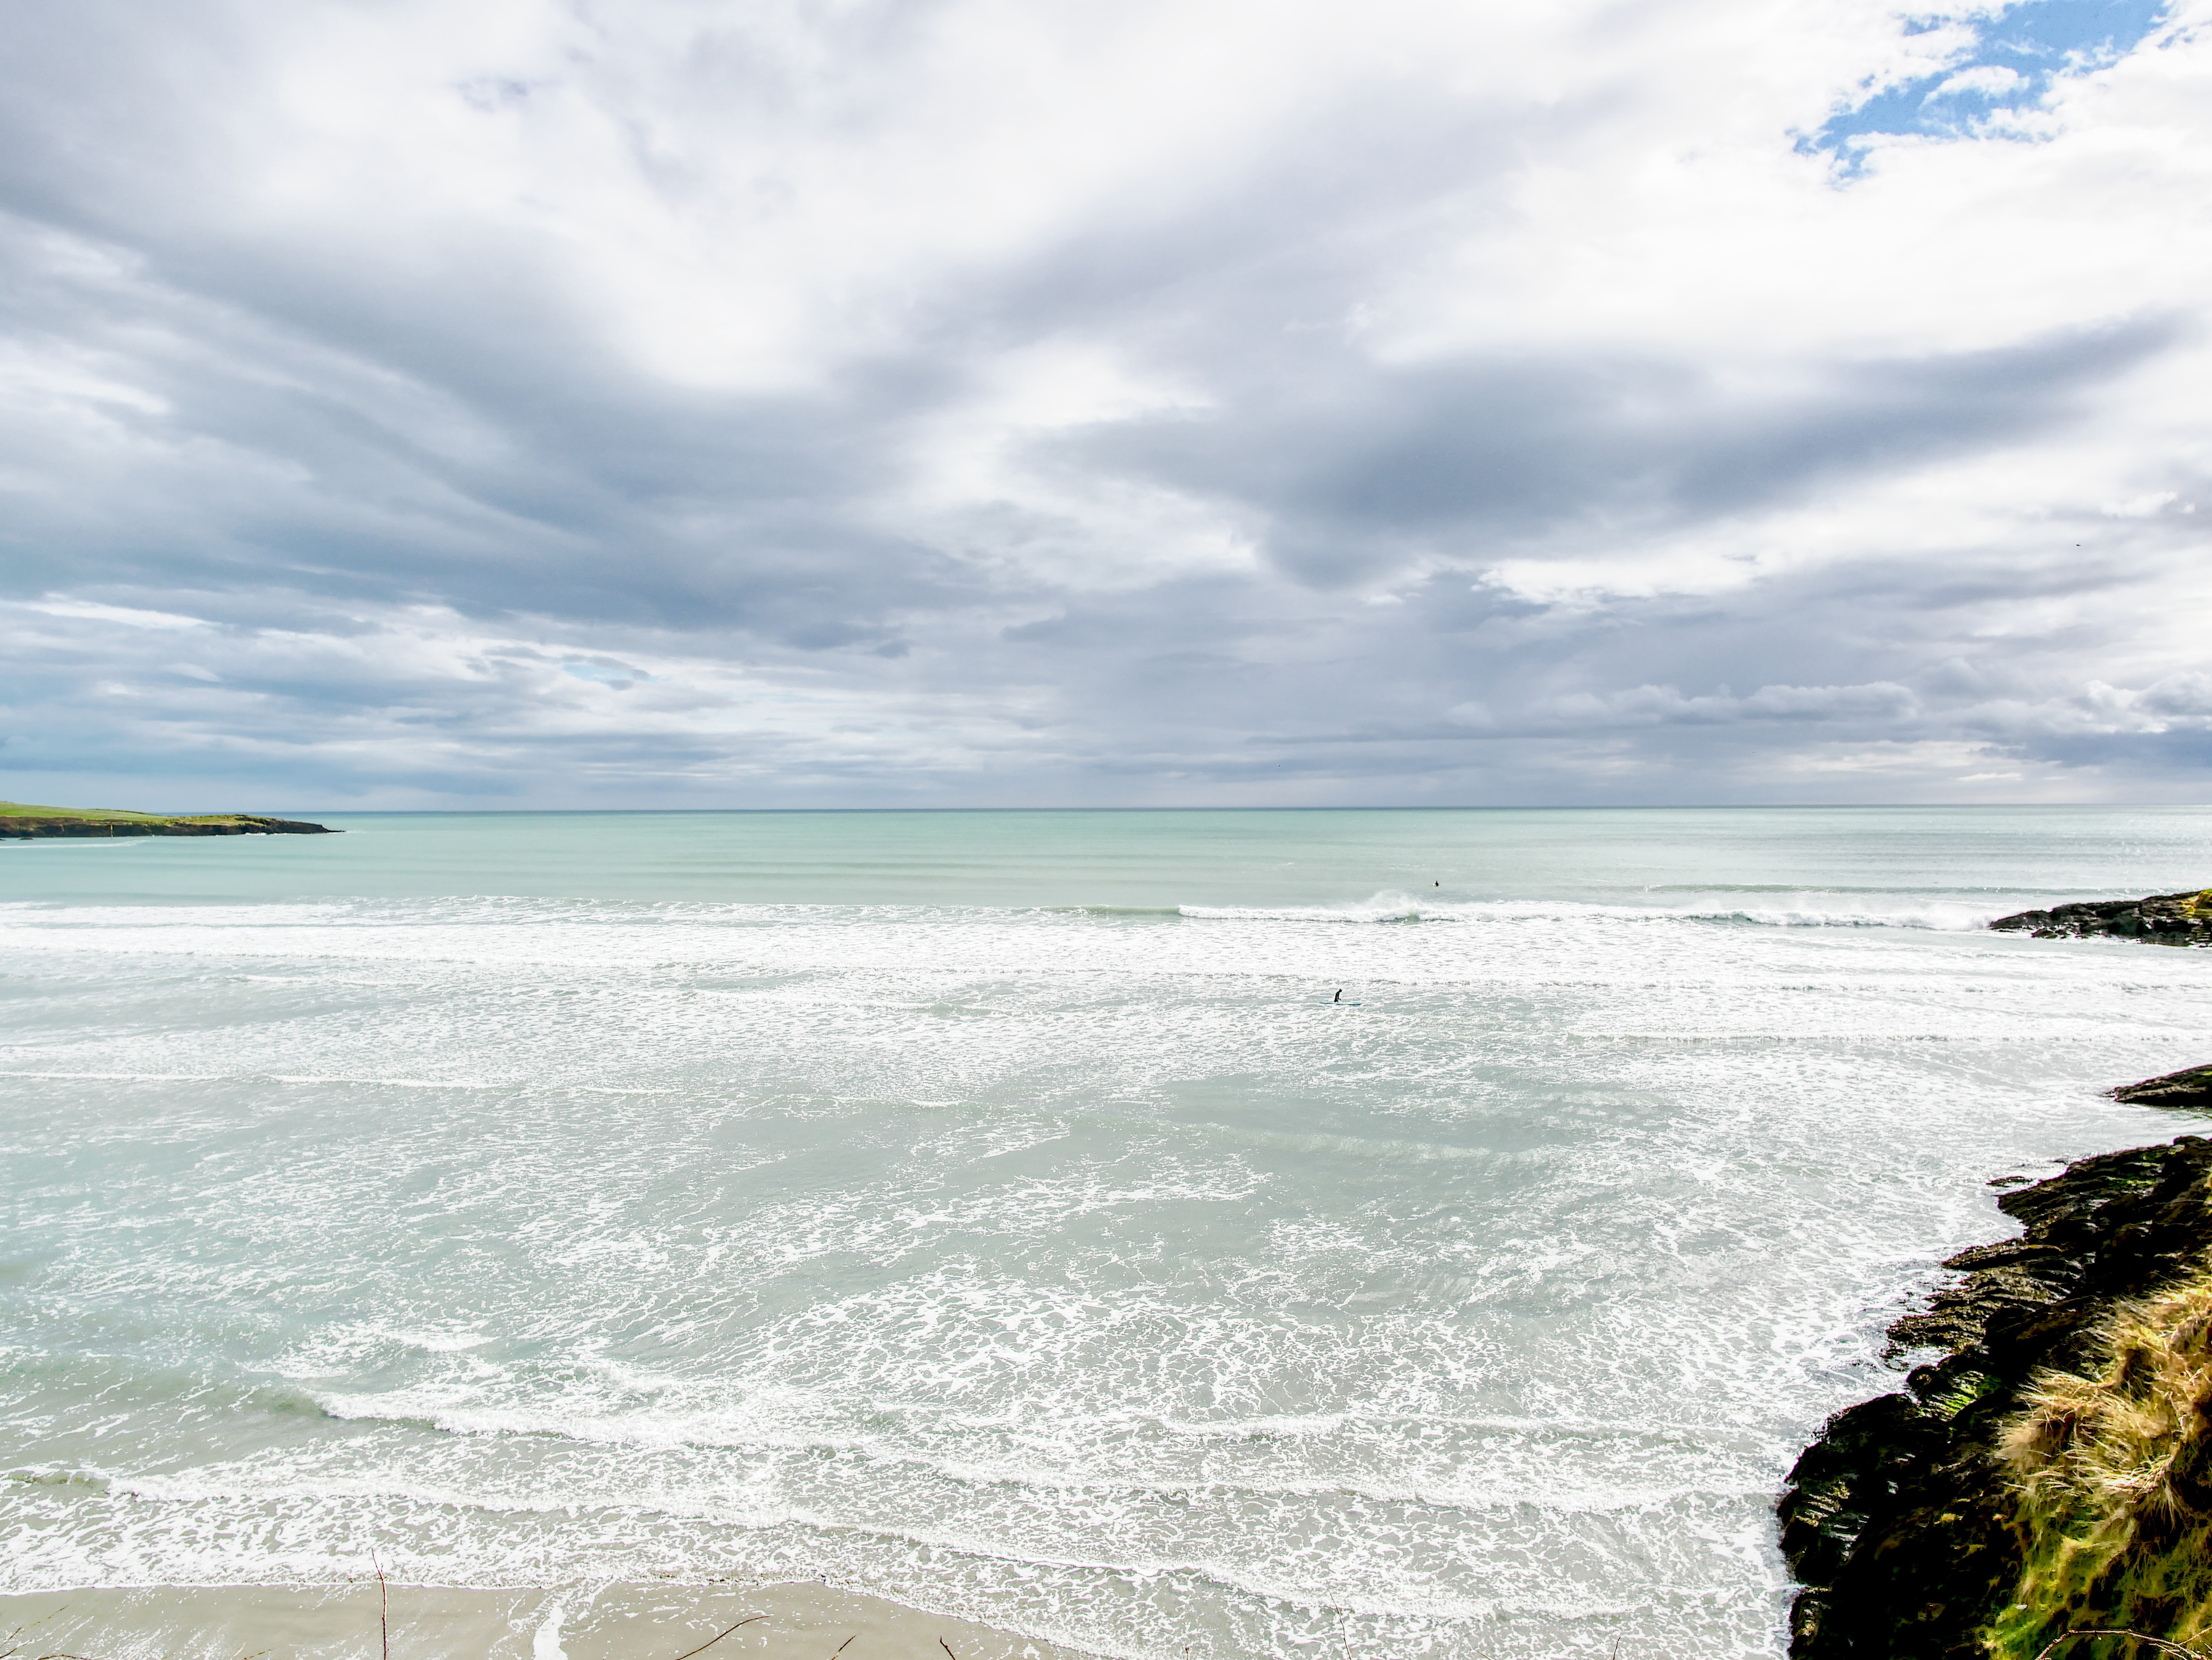 Clouds, ocean, and beach landscape image Free stock